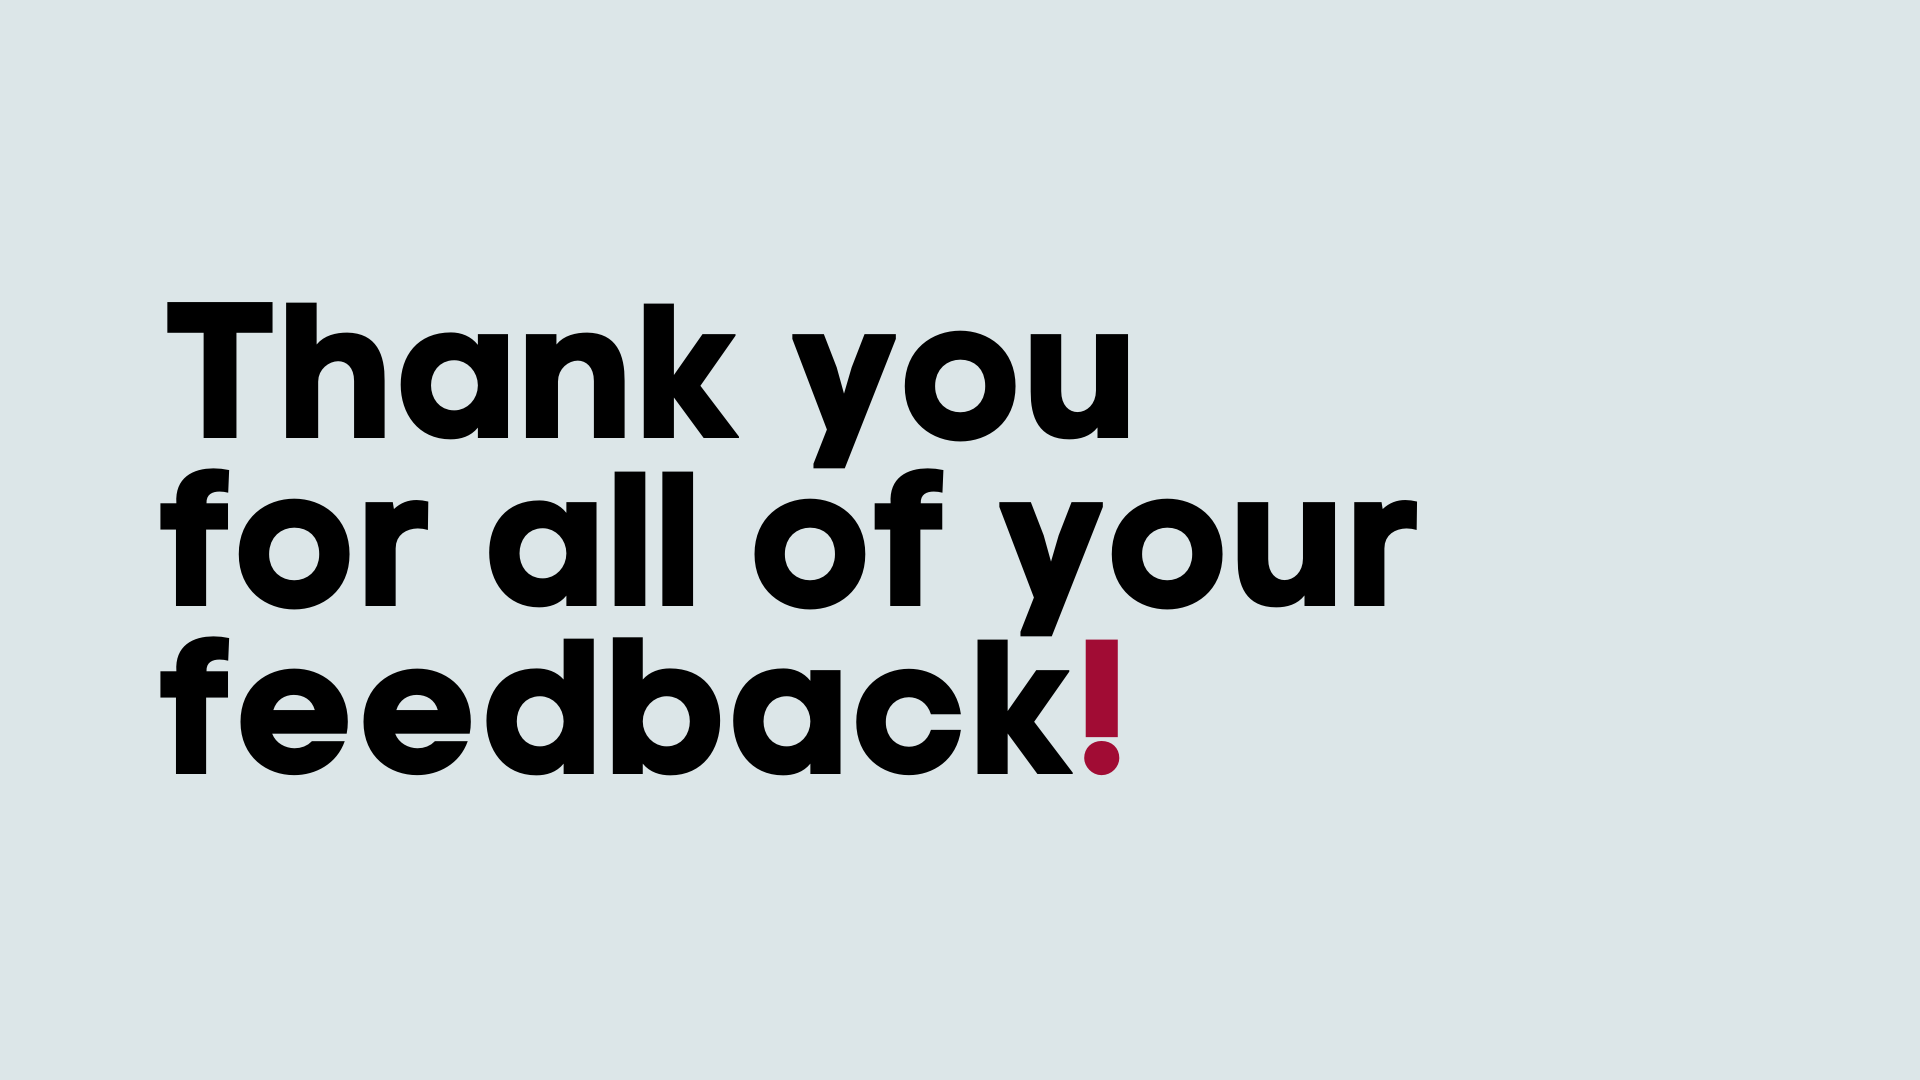 Thank you for all of your feedback!